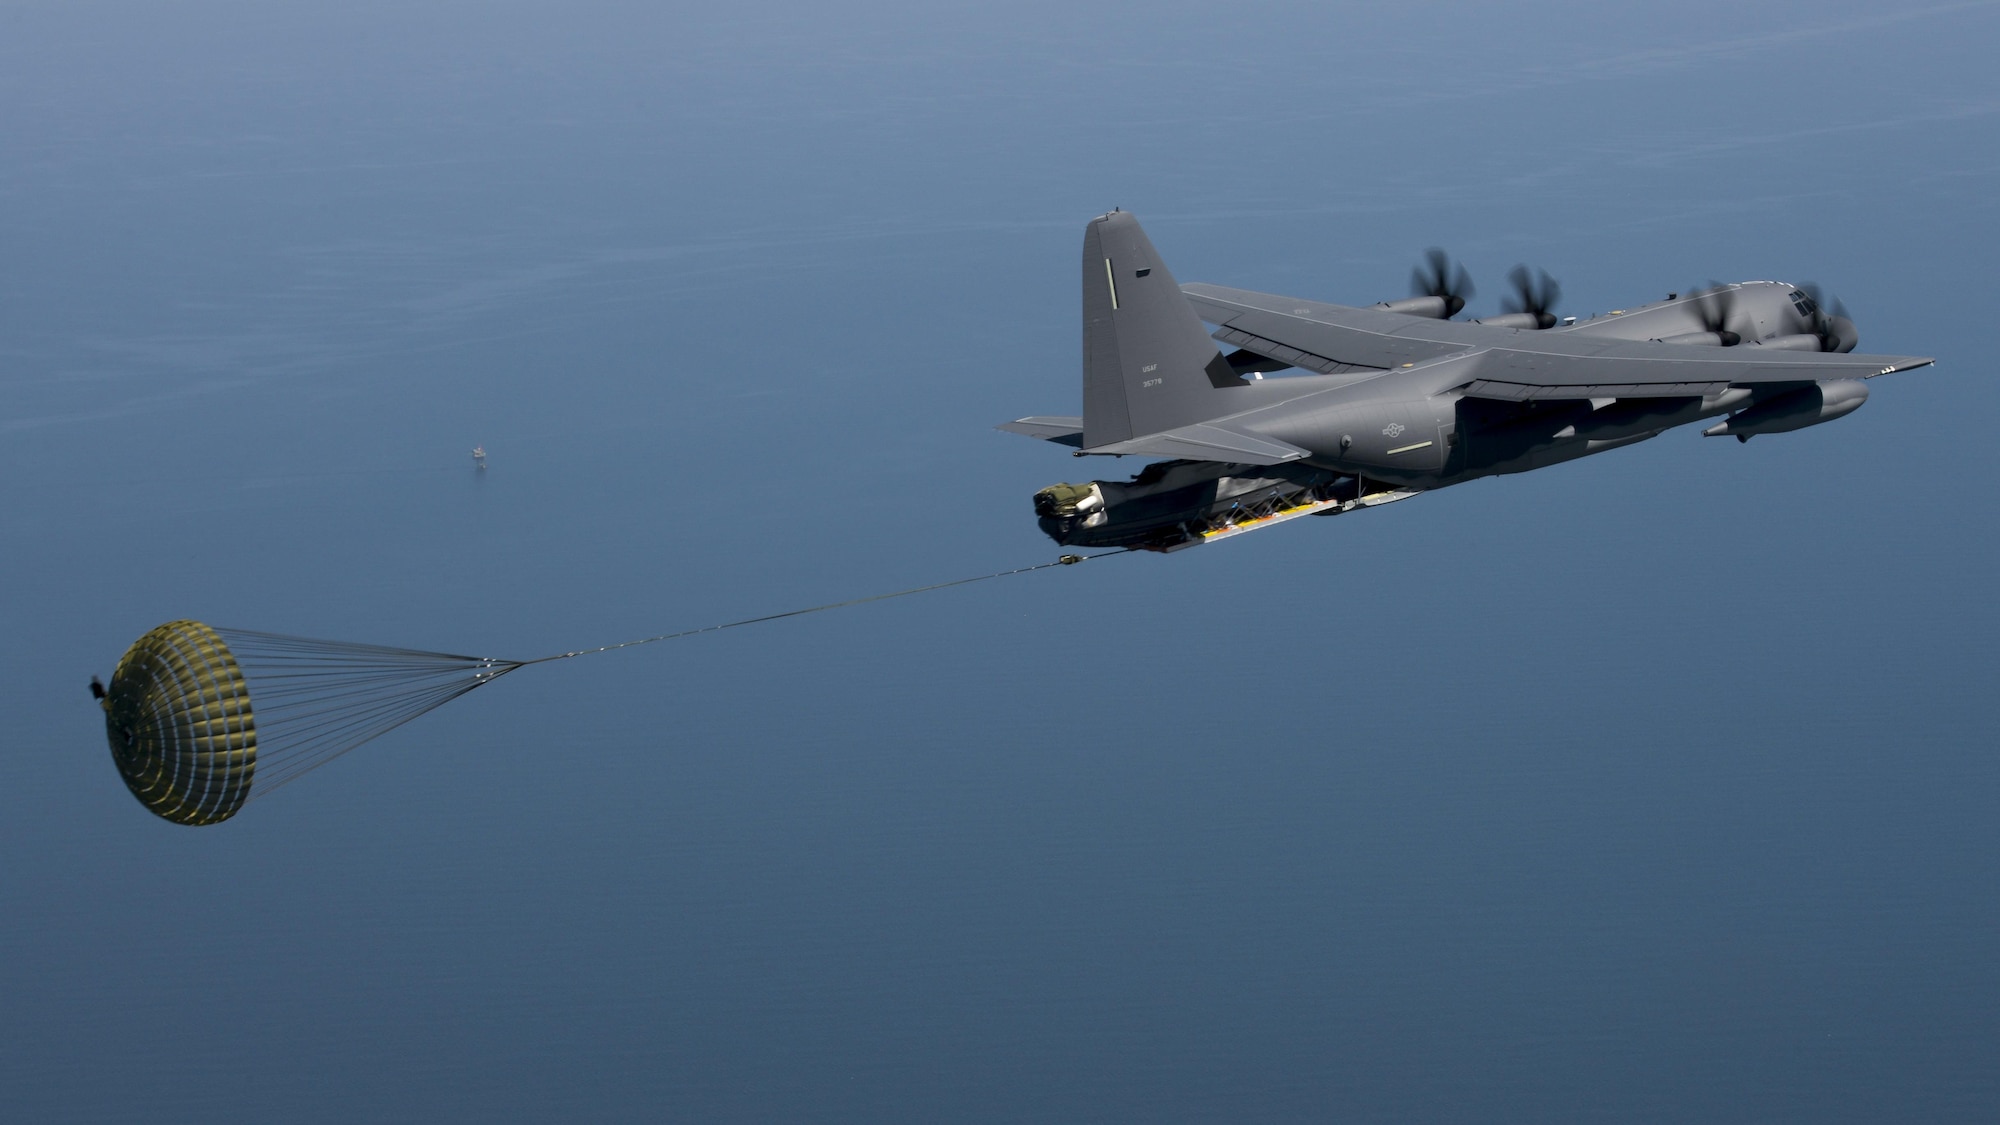 A U.S. Air Force MC-130J Commando II performs a Maritime Craft Aerial Delivery System drop during an exercise April 16, 2016, over the Black Sea. Airborne Systems MCADS is the only airdrop system currently in service that is capable of delivering large Rigid Inflatable Boats.(U.S. Air Force photo by Senior Airman Victoria H. Taylor/Released)